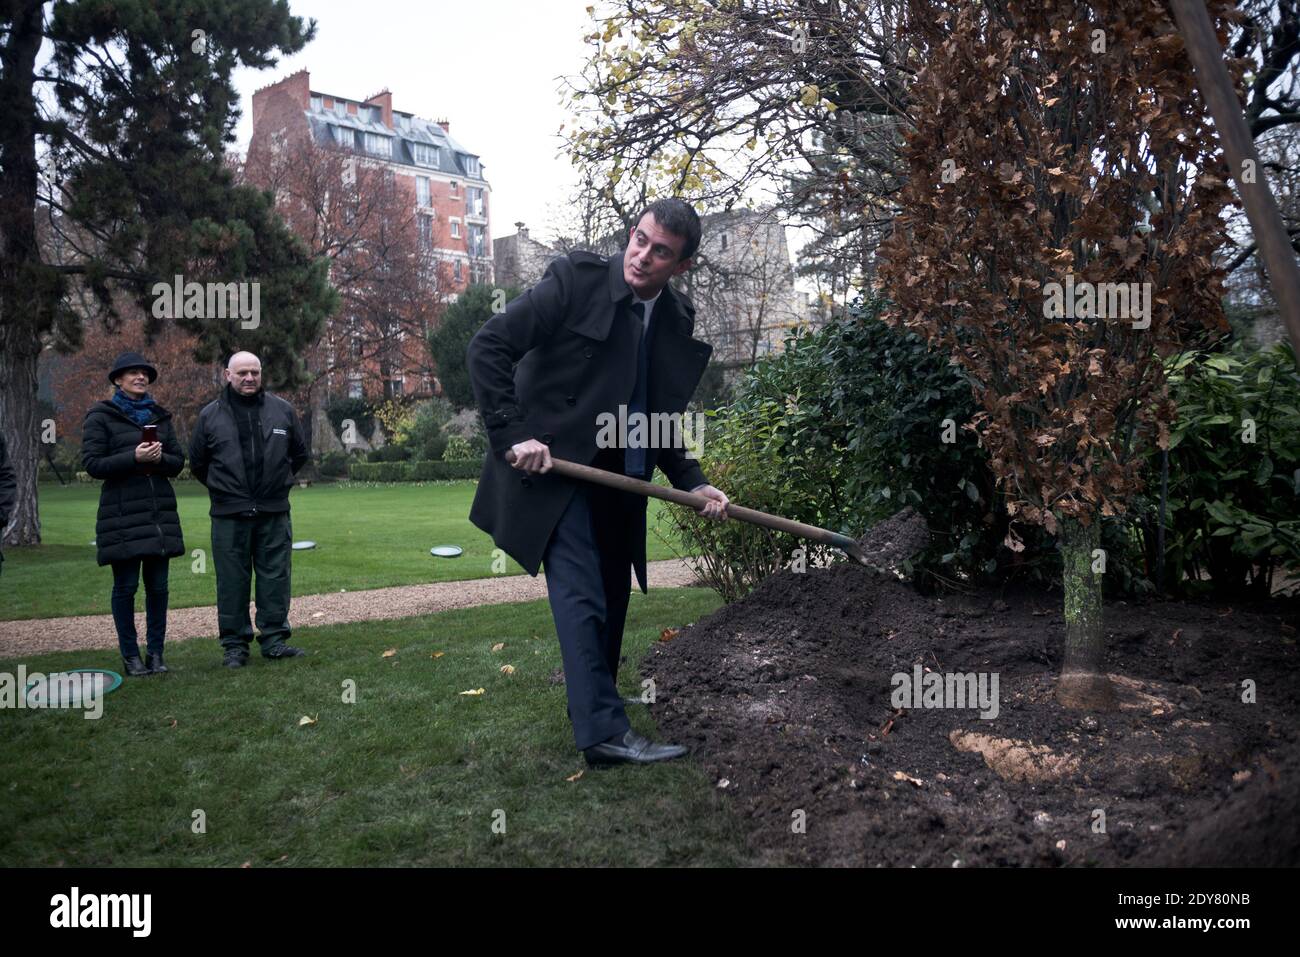 French Prime Minister Manuel Valls - as is the republican tradition - plants the tree called 'of the Prime Minister' watched by his wife Anne Gravoin in the gardens of his headquarters Hotel de Matignon in Paris, France on December 16, 2014. The tree, chosen by the Prime Minister, is an oak of the species 'Quercus robur fastigiata' and is located on the front lawn. The tradition of planting a tree at the PM's headquarters was introduced by the late Prime Minister Raymond Barre in 1978. Photo Pool by Nicolas Messyasz/ABACAPRESS.COM Stock Photo